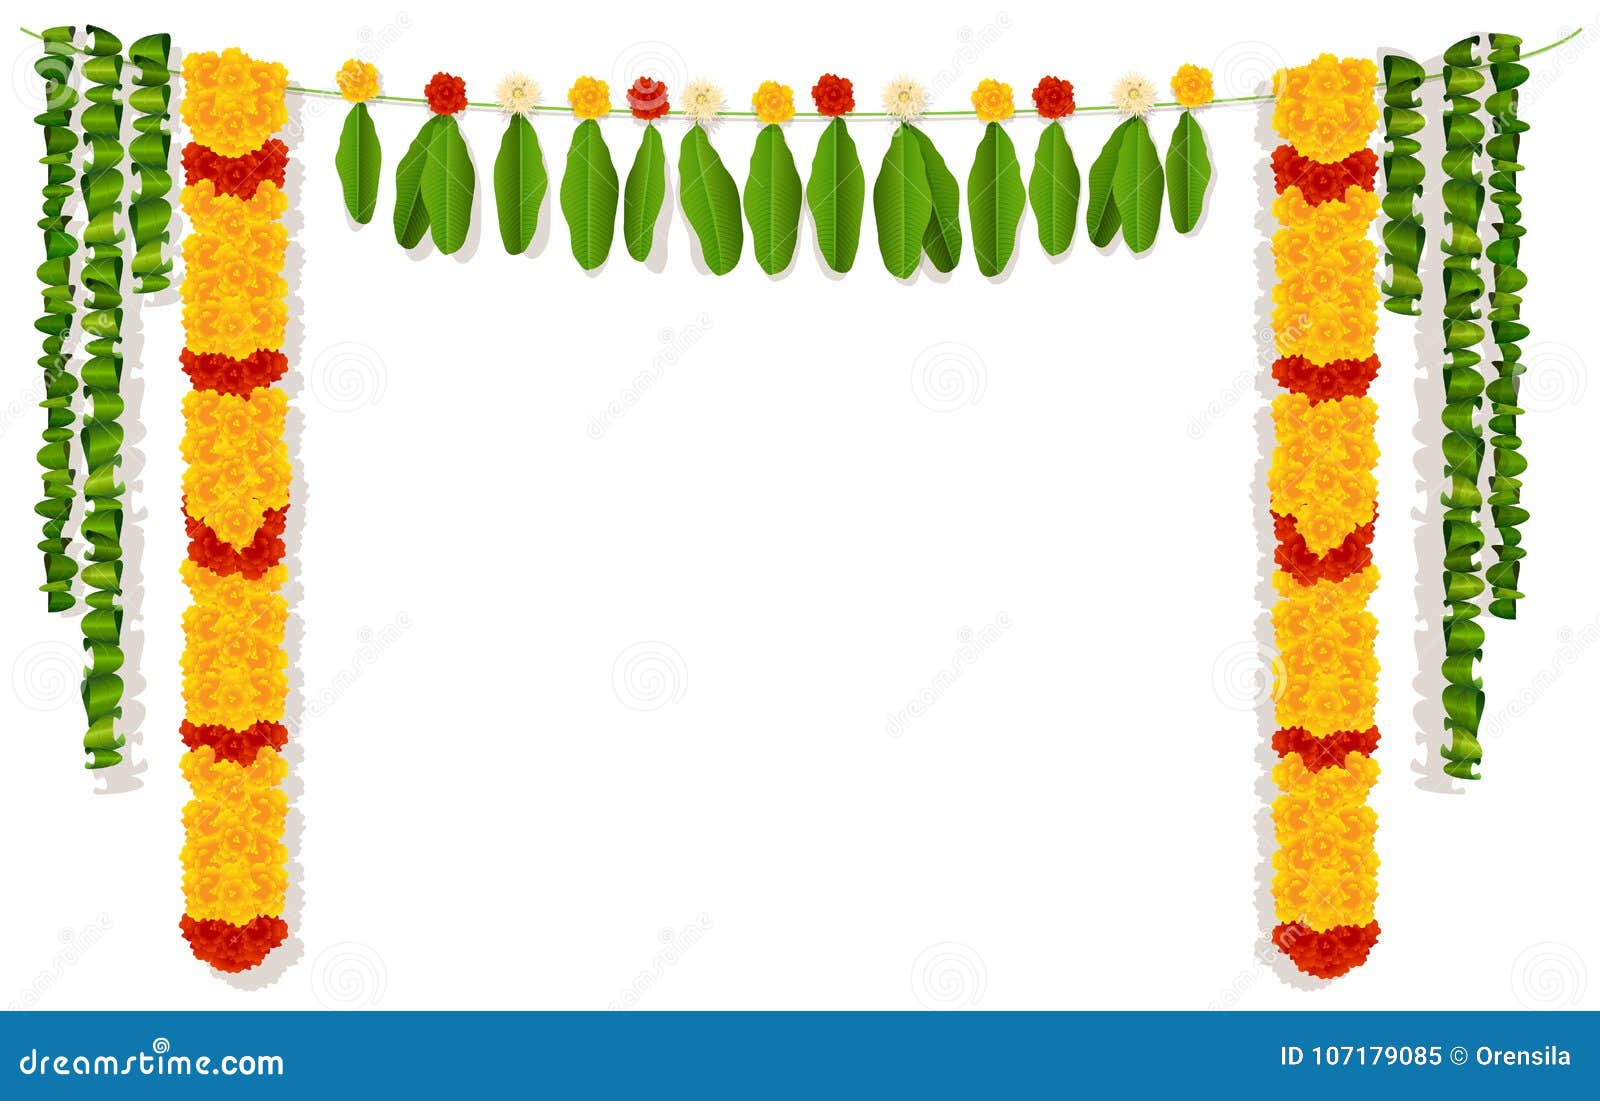 indian garland of flowers and leaves. religion festive holiday decoration